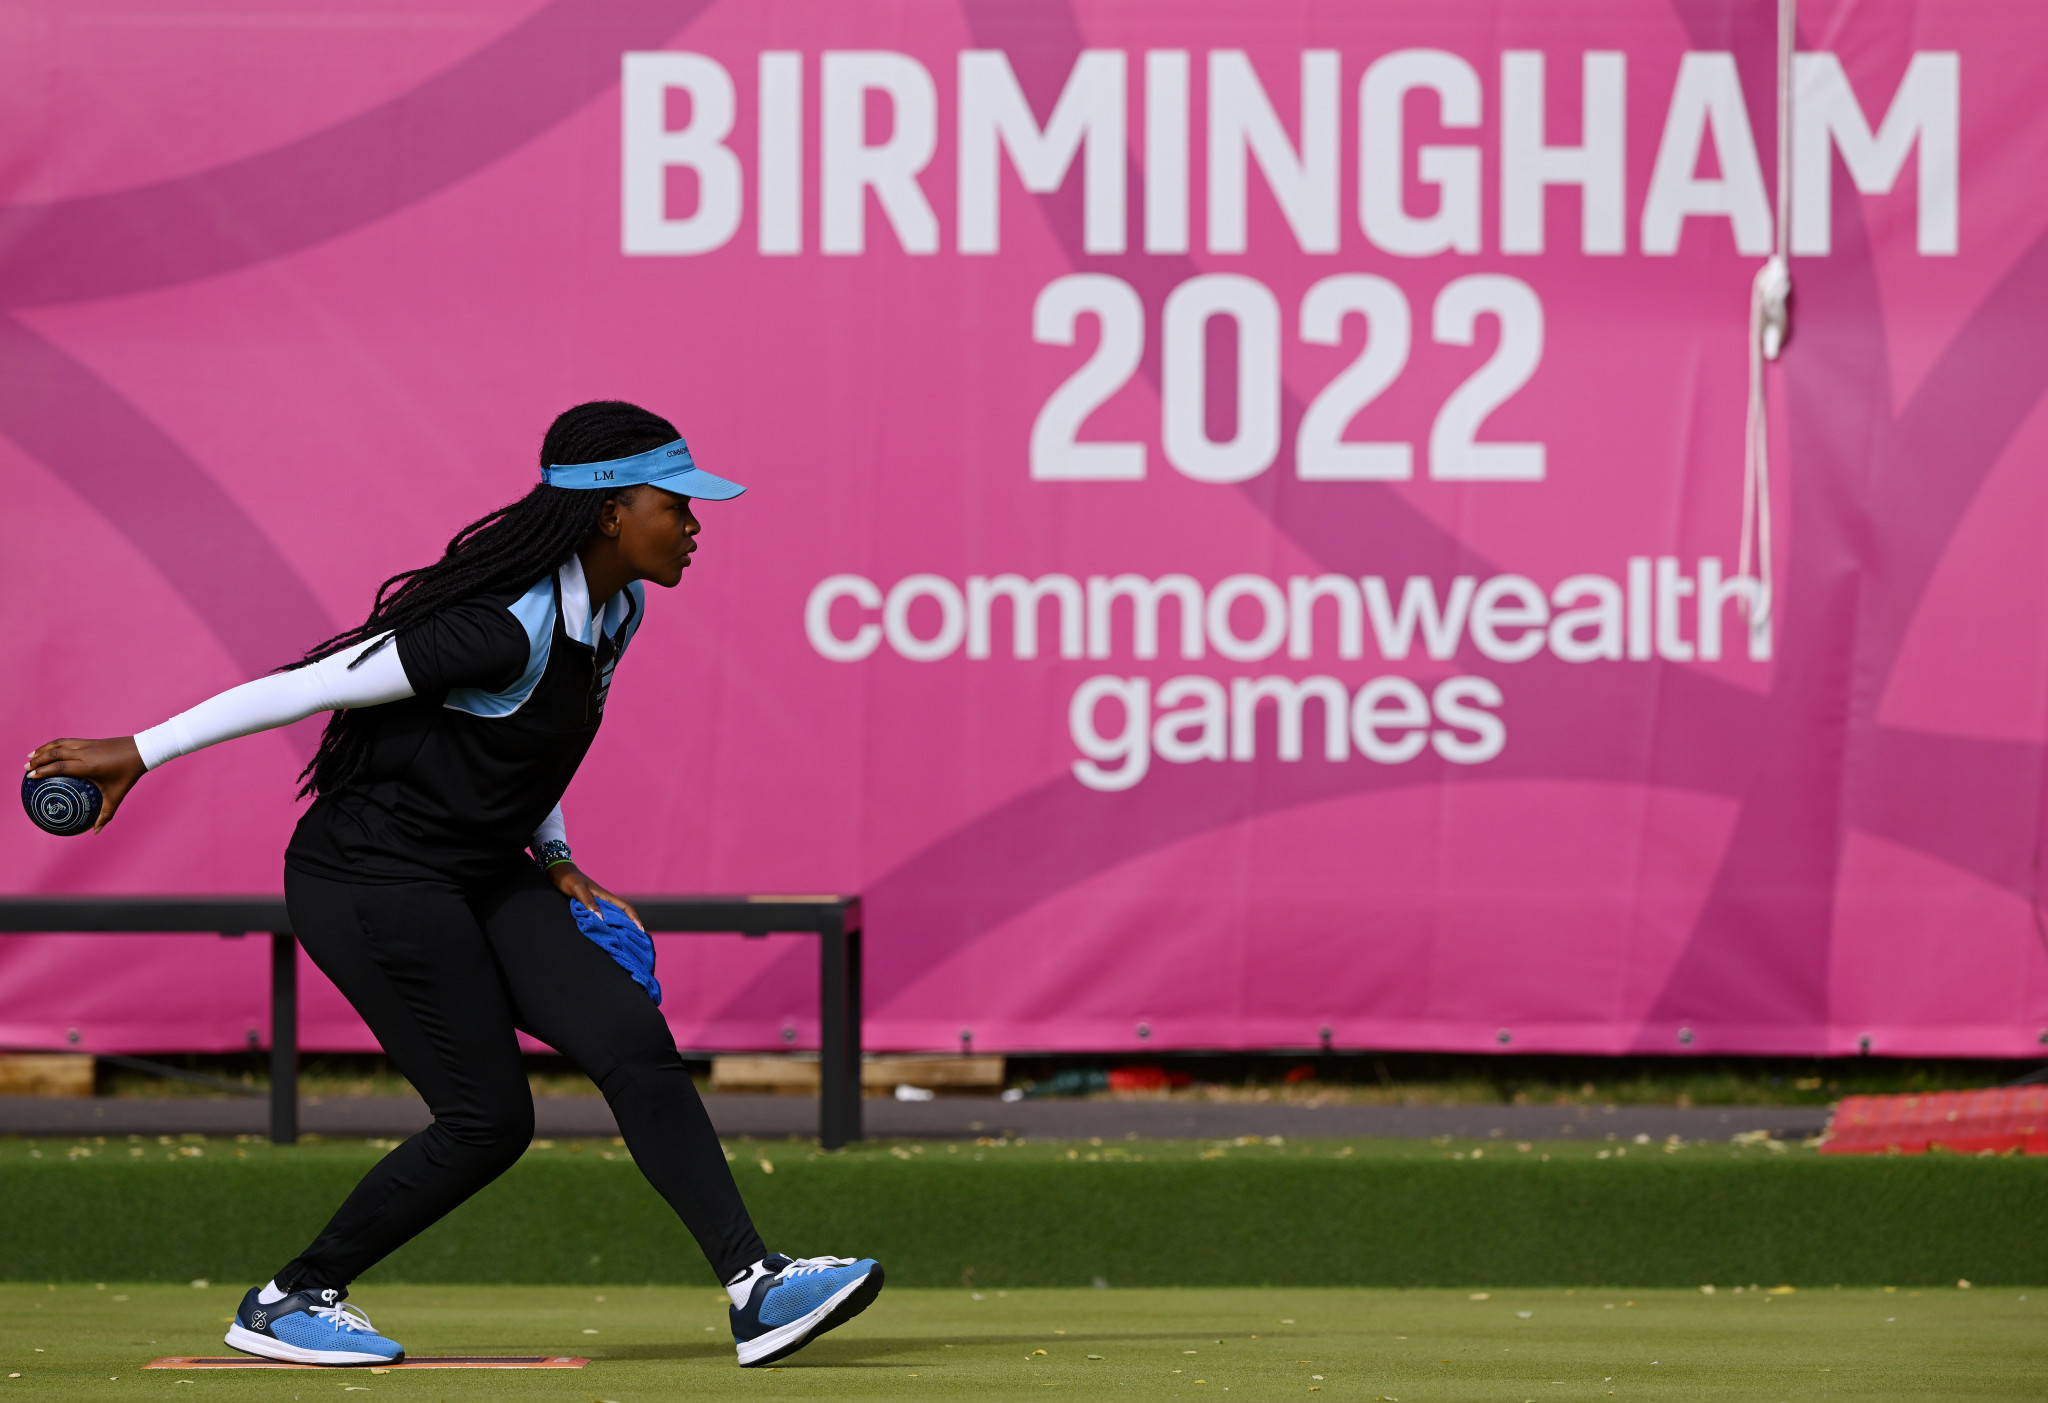 Organisation of Birmingham 2022 "well above expectations", claims CGF chief